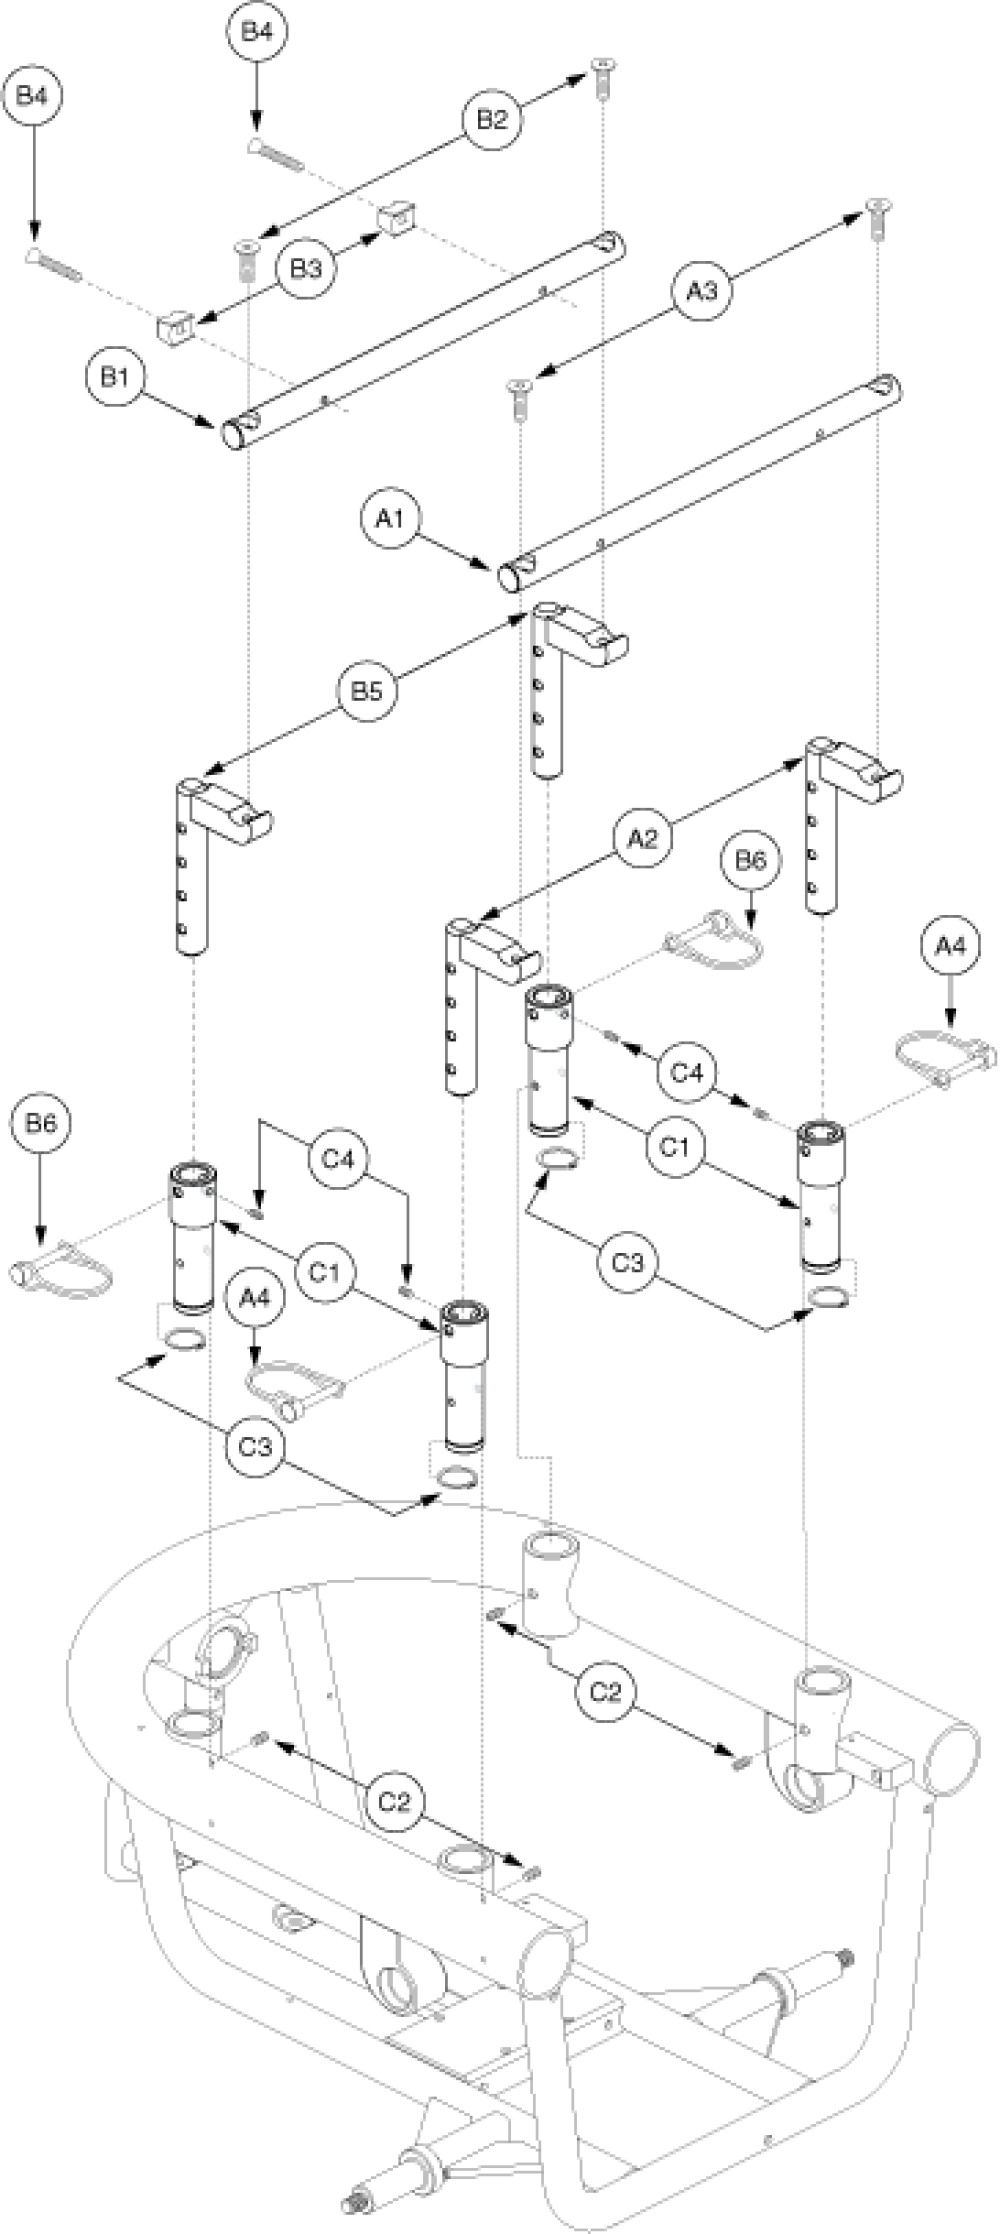 Seat Tower Assembly - Contour Seating parts diagram